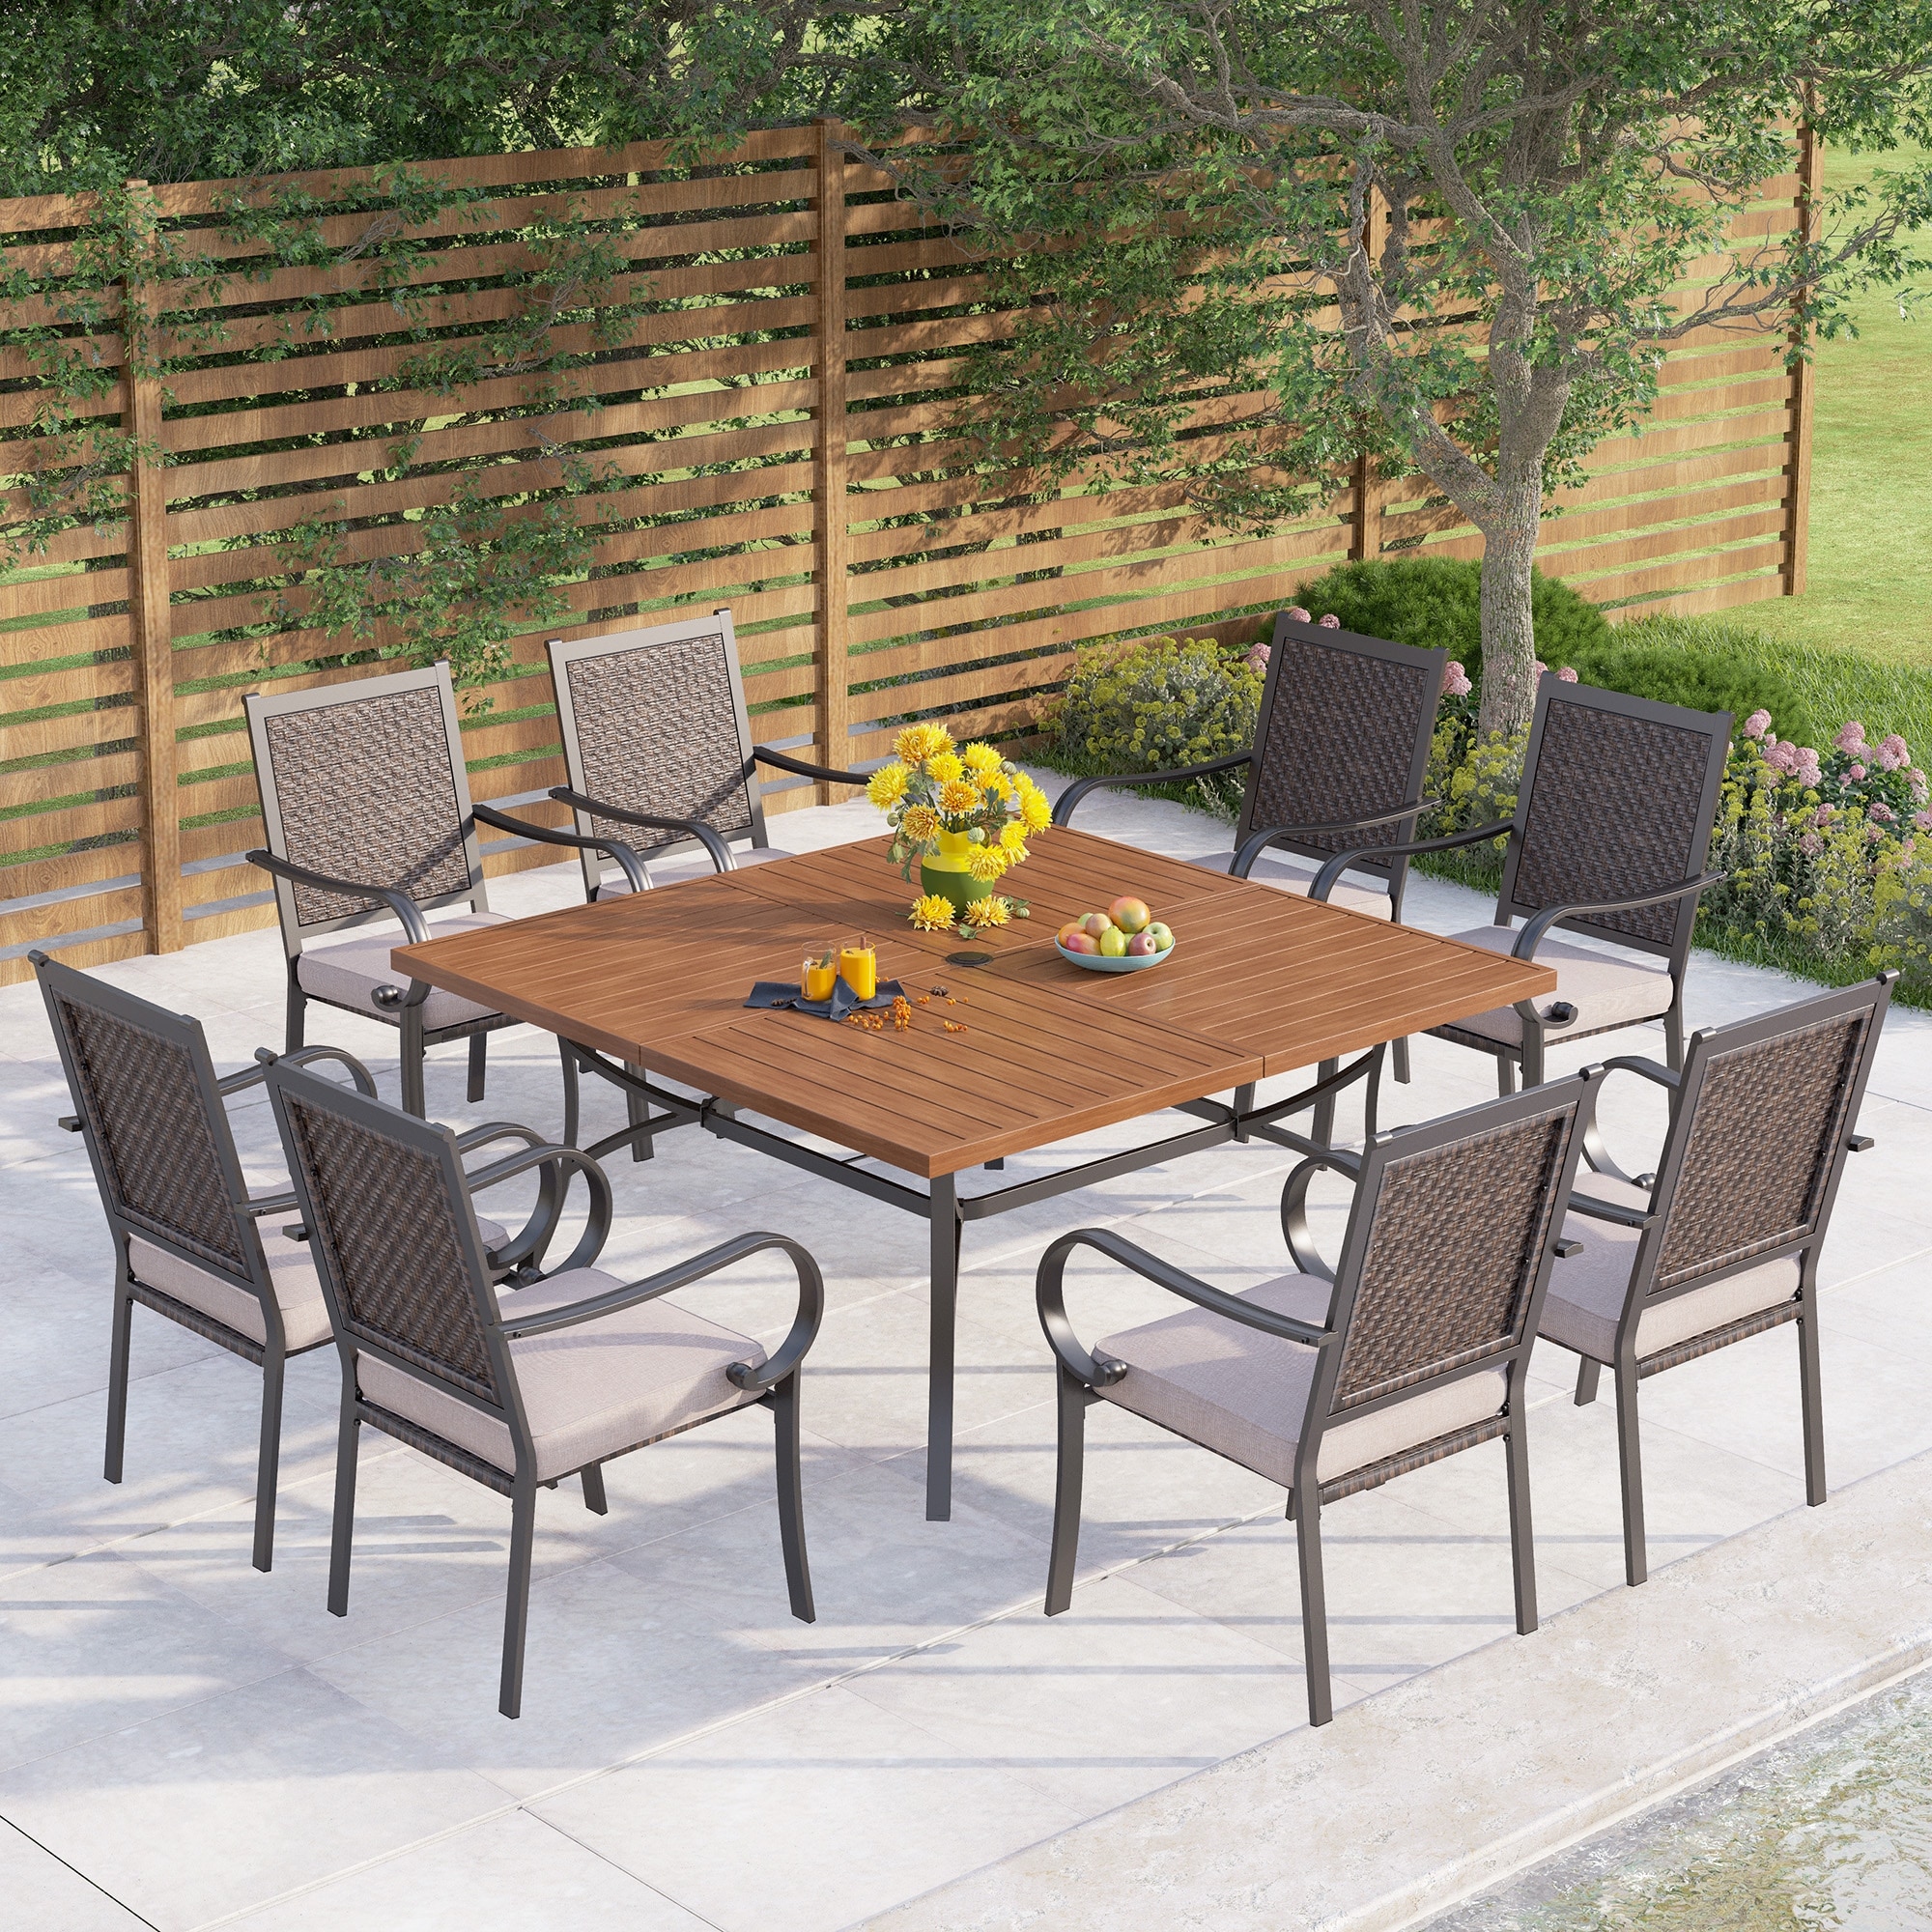 9-piece Patio Dining Set  60 Inch Square Metal Table And 8 Rattan Chairs With Cushions